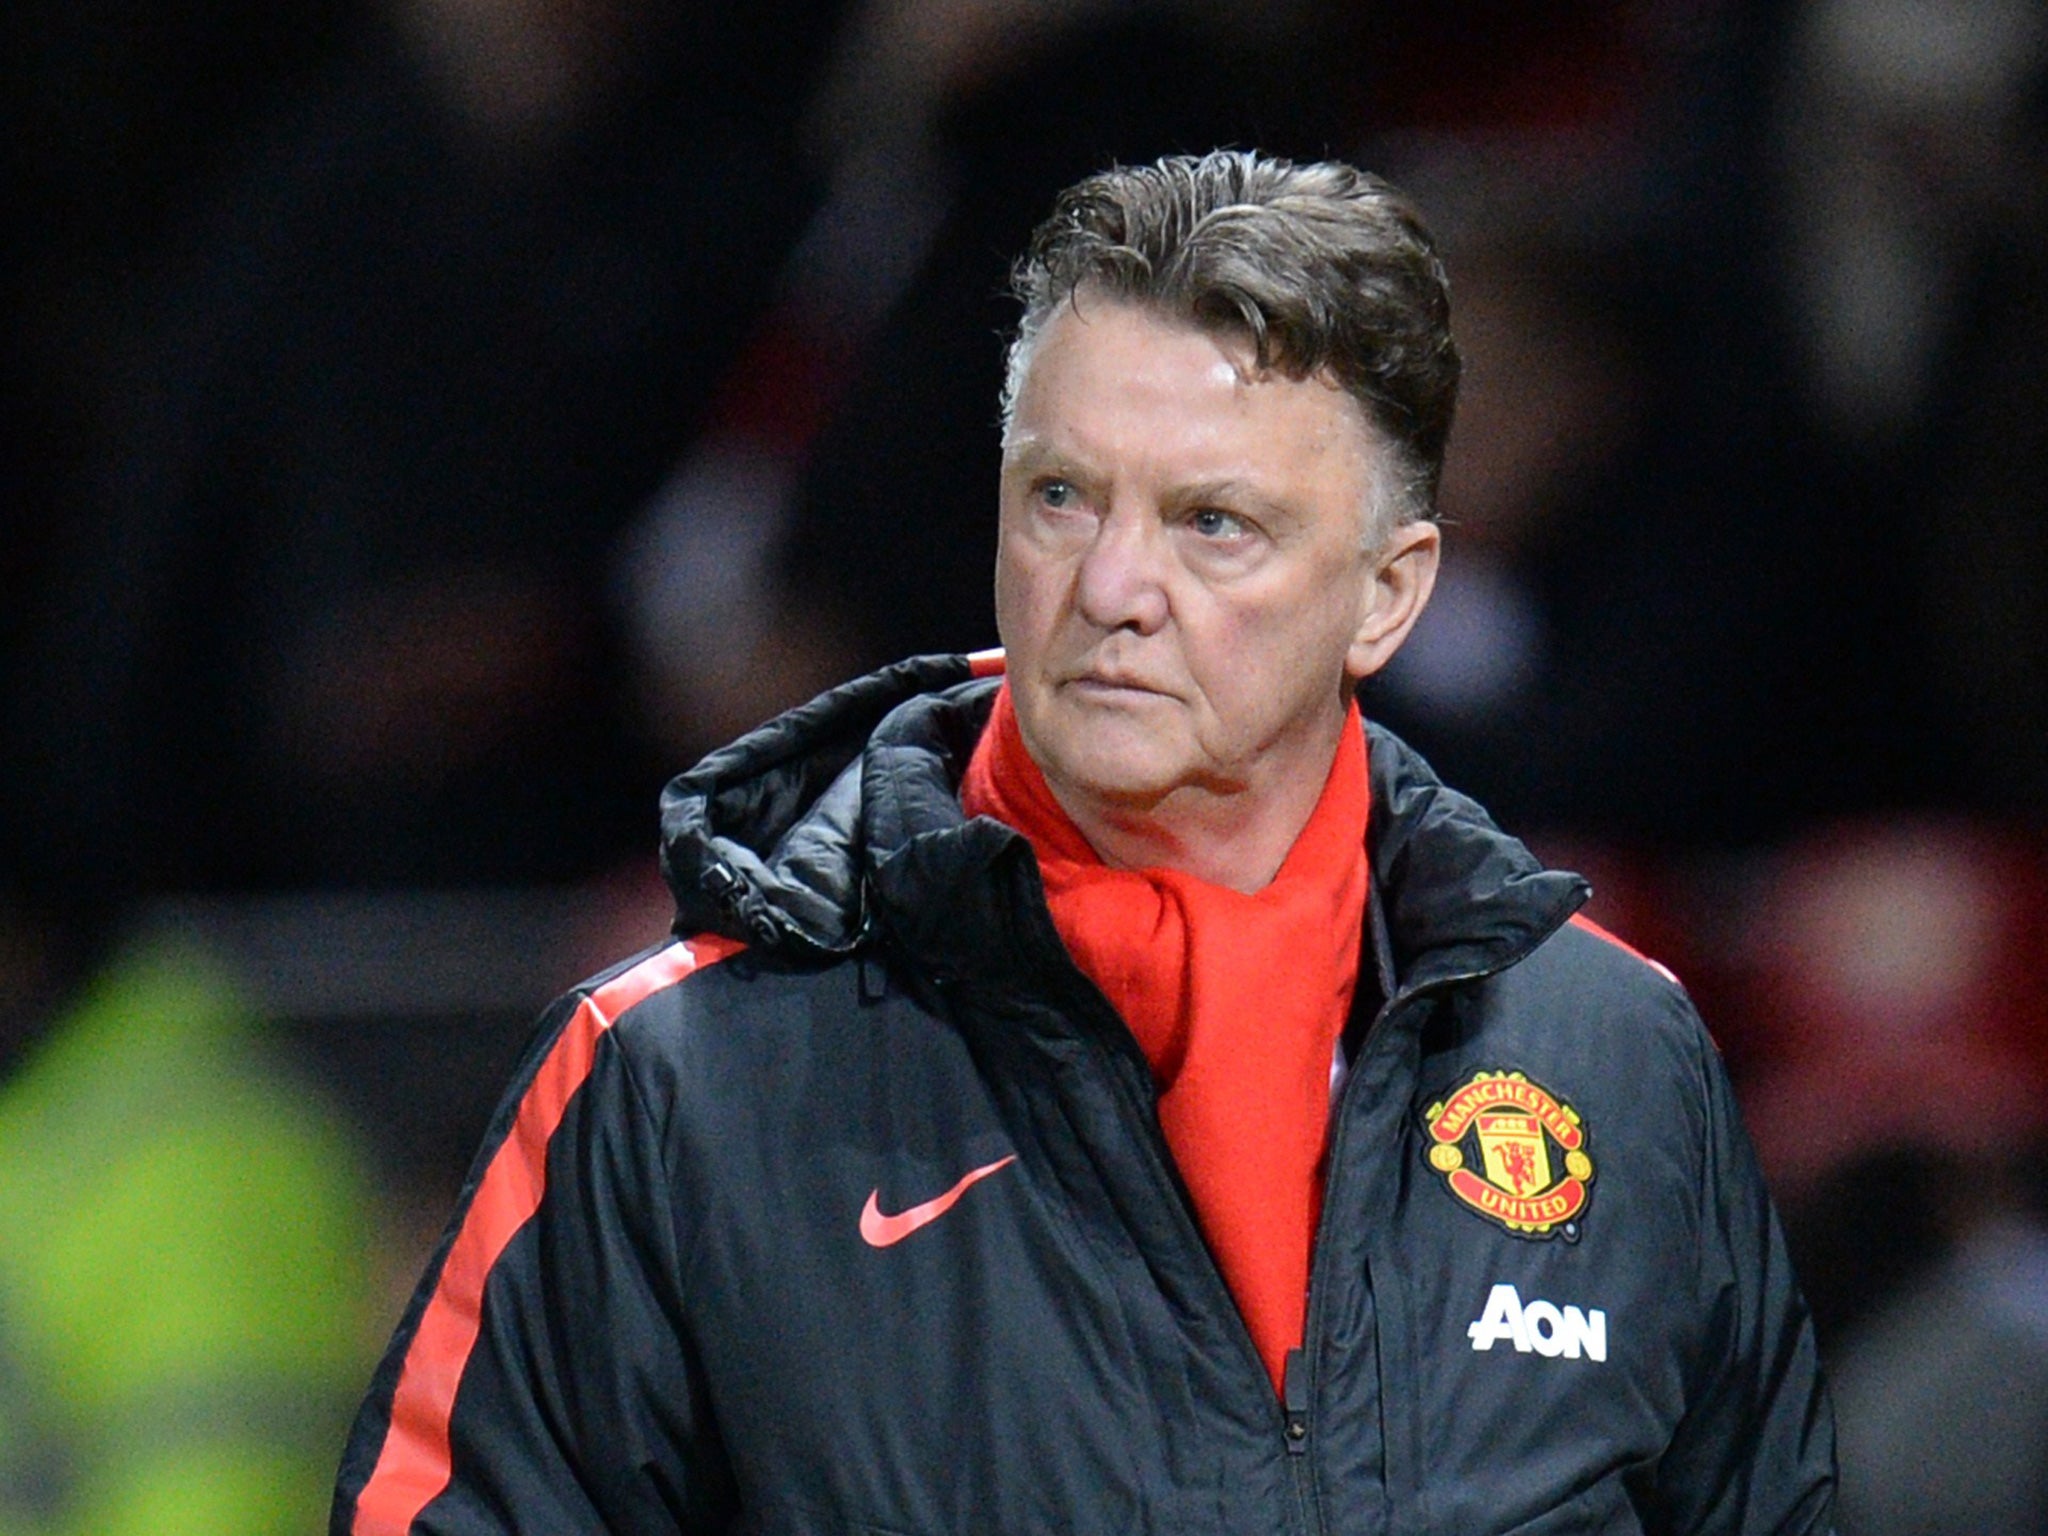 Louis van Gaal said any positive feedback from his predecessor would make him proud